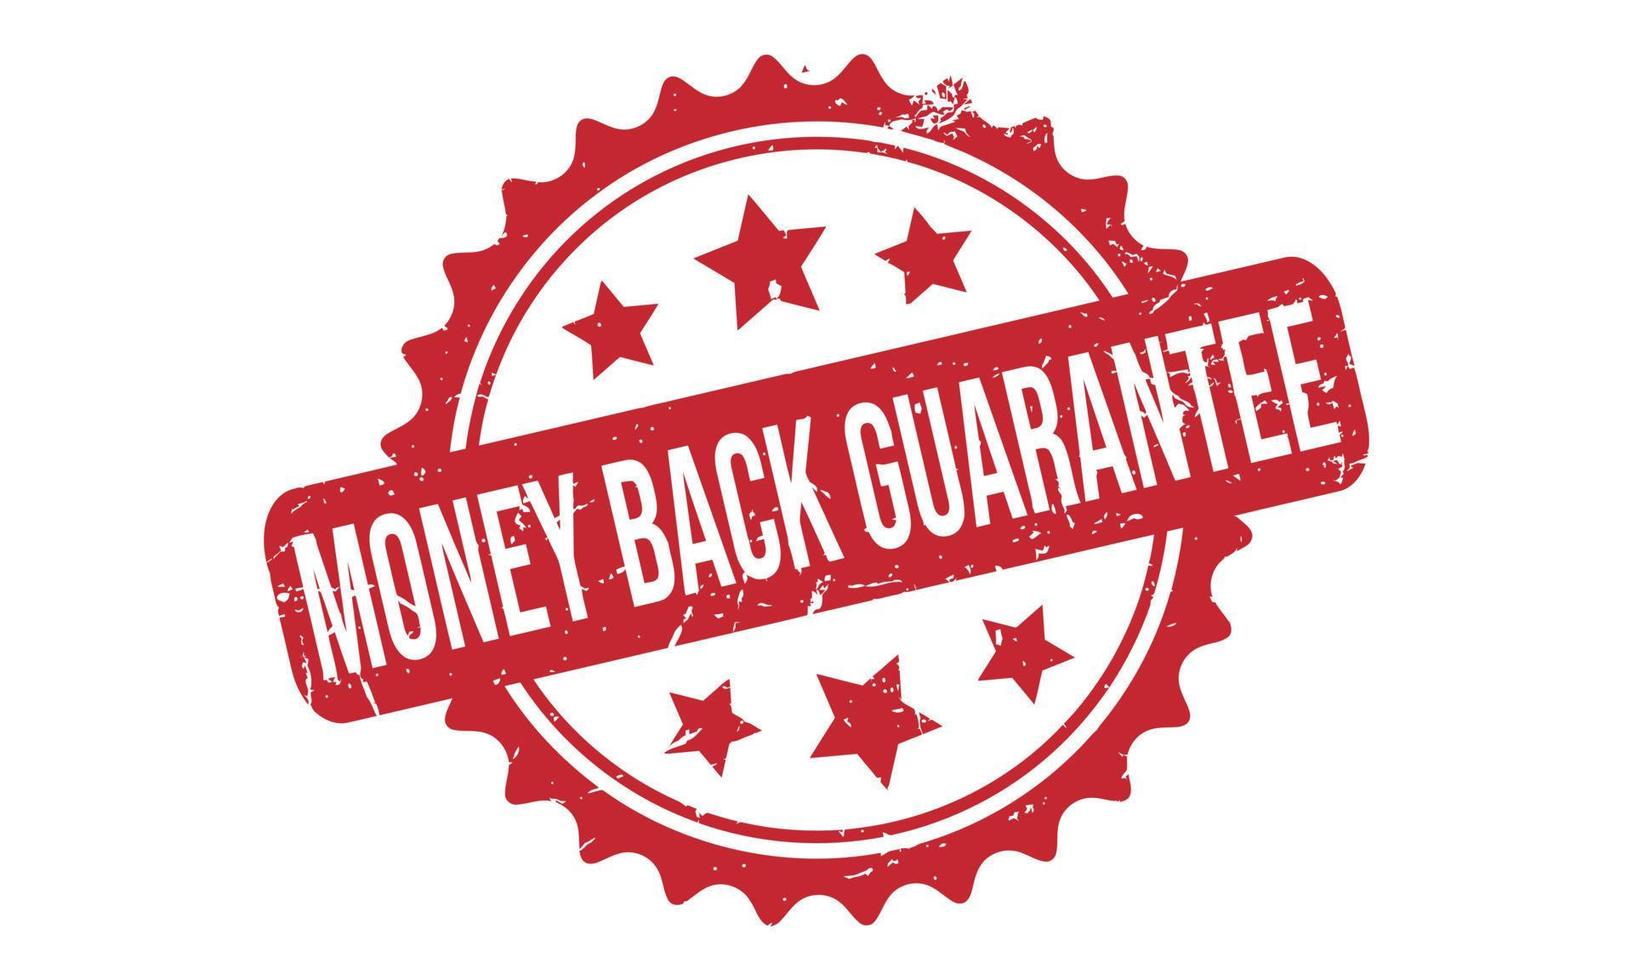 MONEY BACK GUARANTEE Rubber Stamp Seal Vector